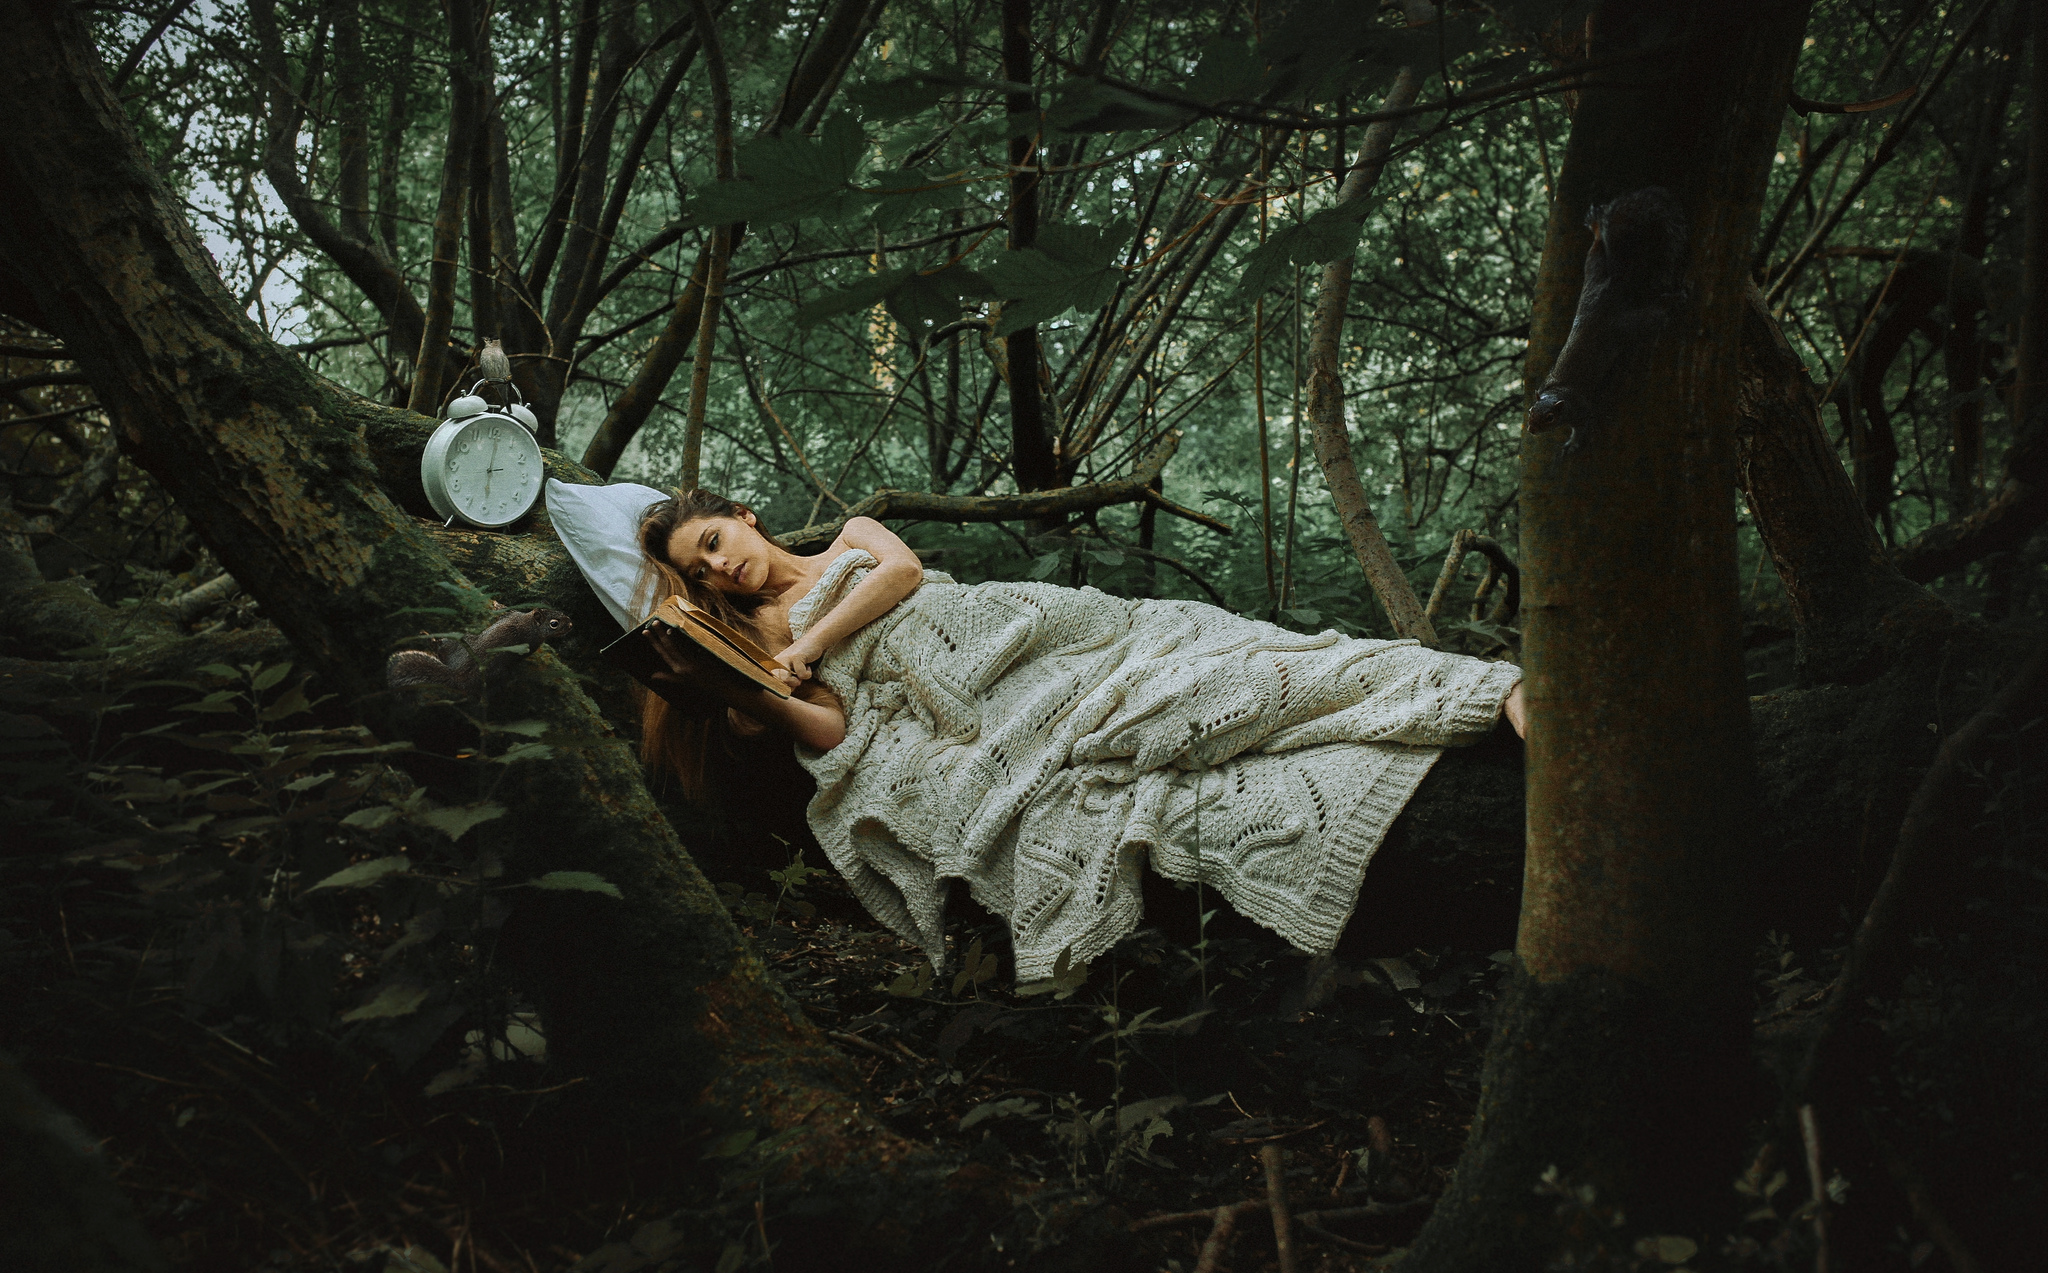 Napping in the Forest by rosiehardy